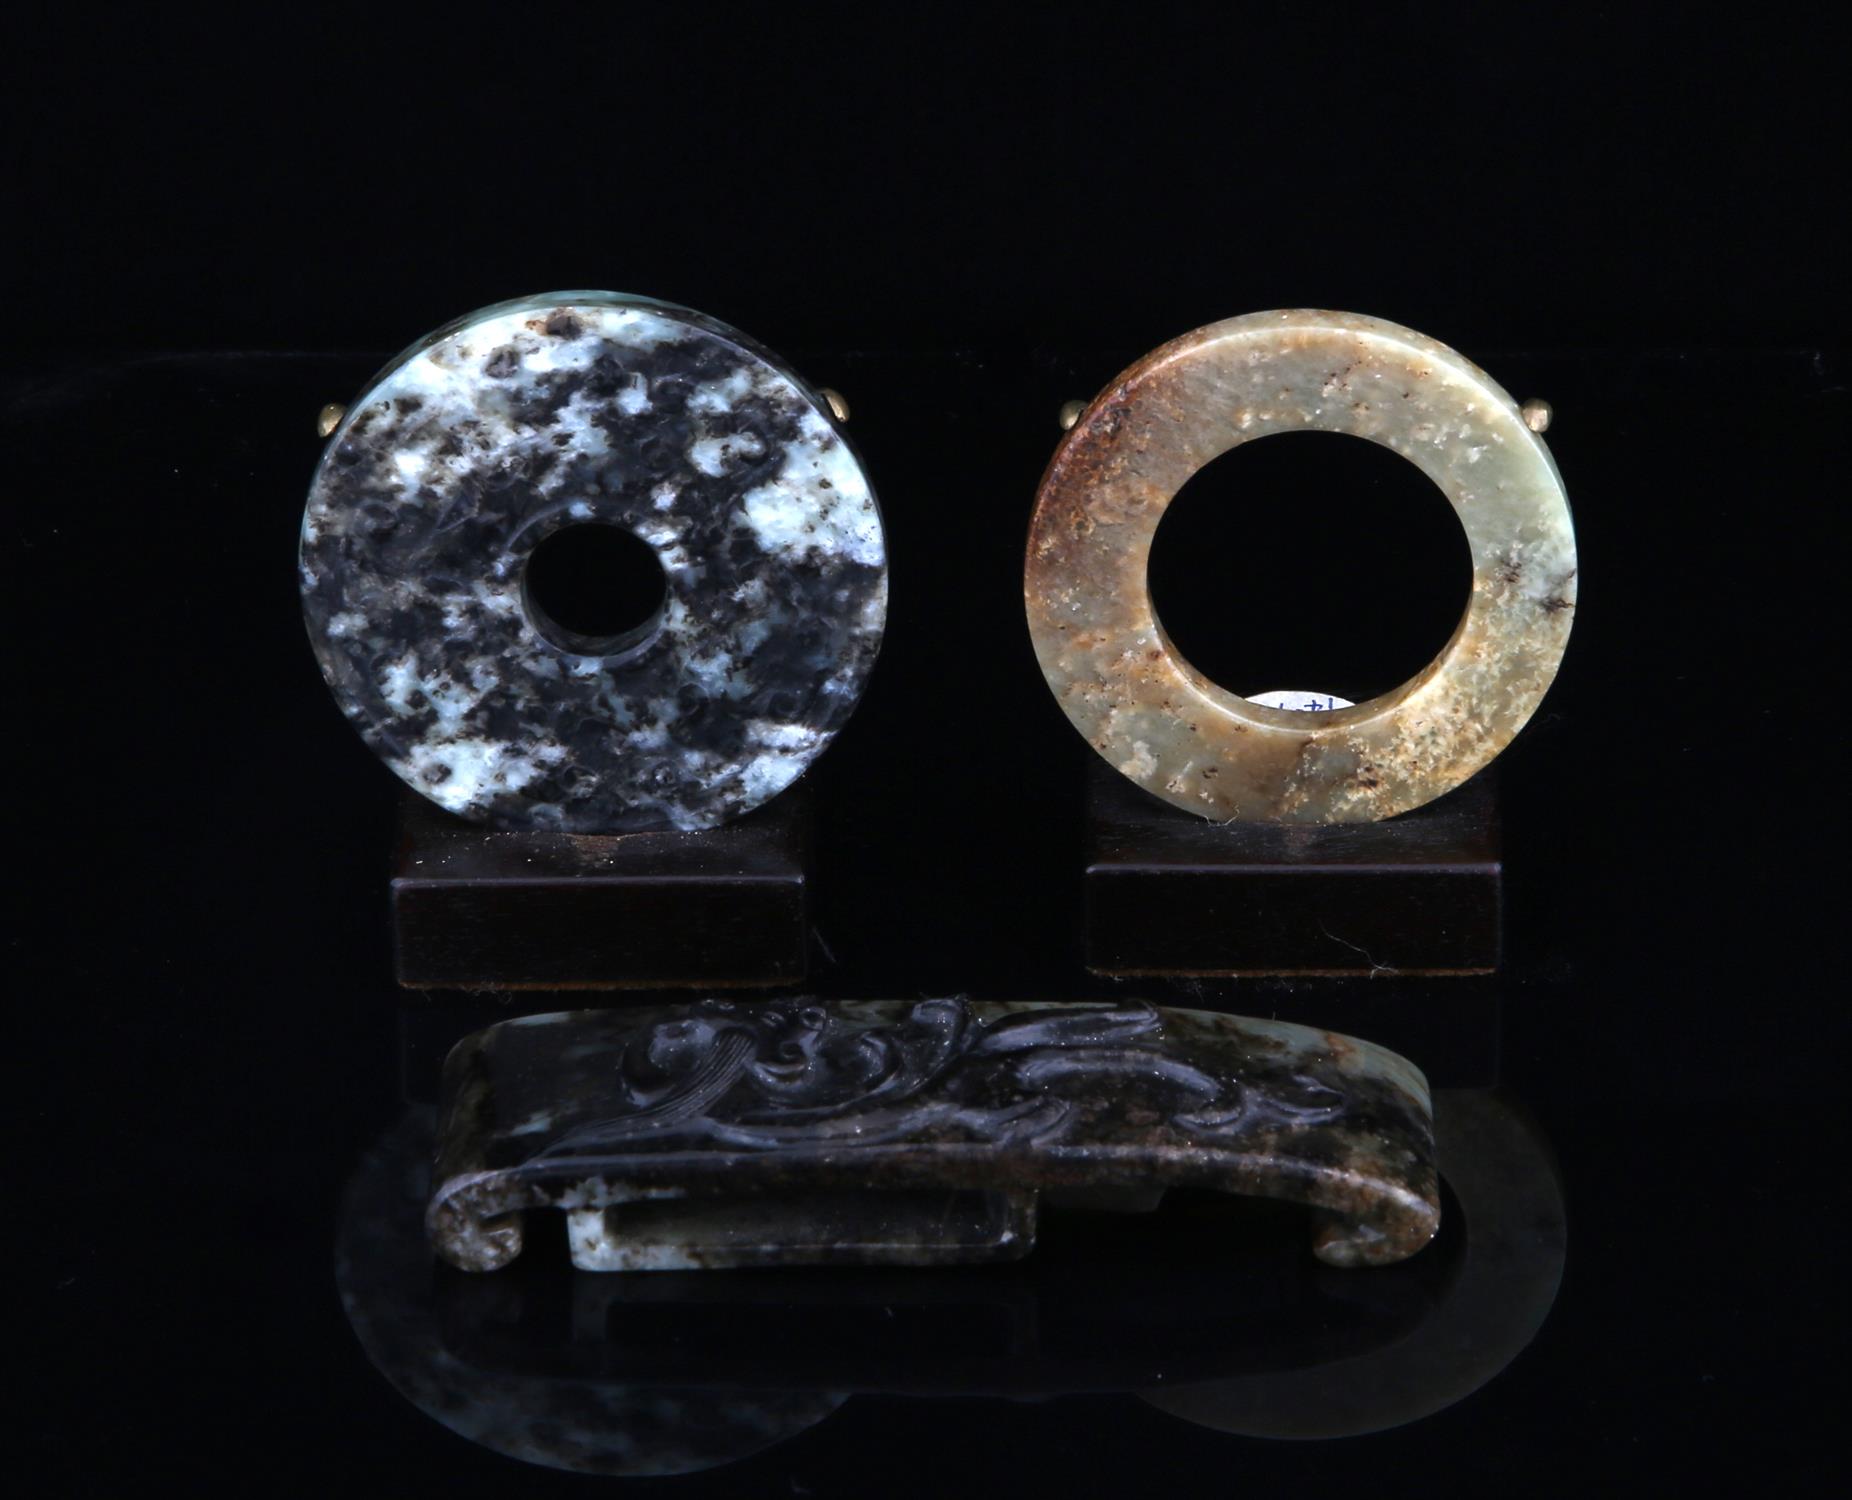 Chinese jade mottled black and grey bi-disc, one side carved with scrolling decoration, - Image 4 of 4